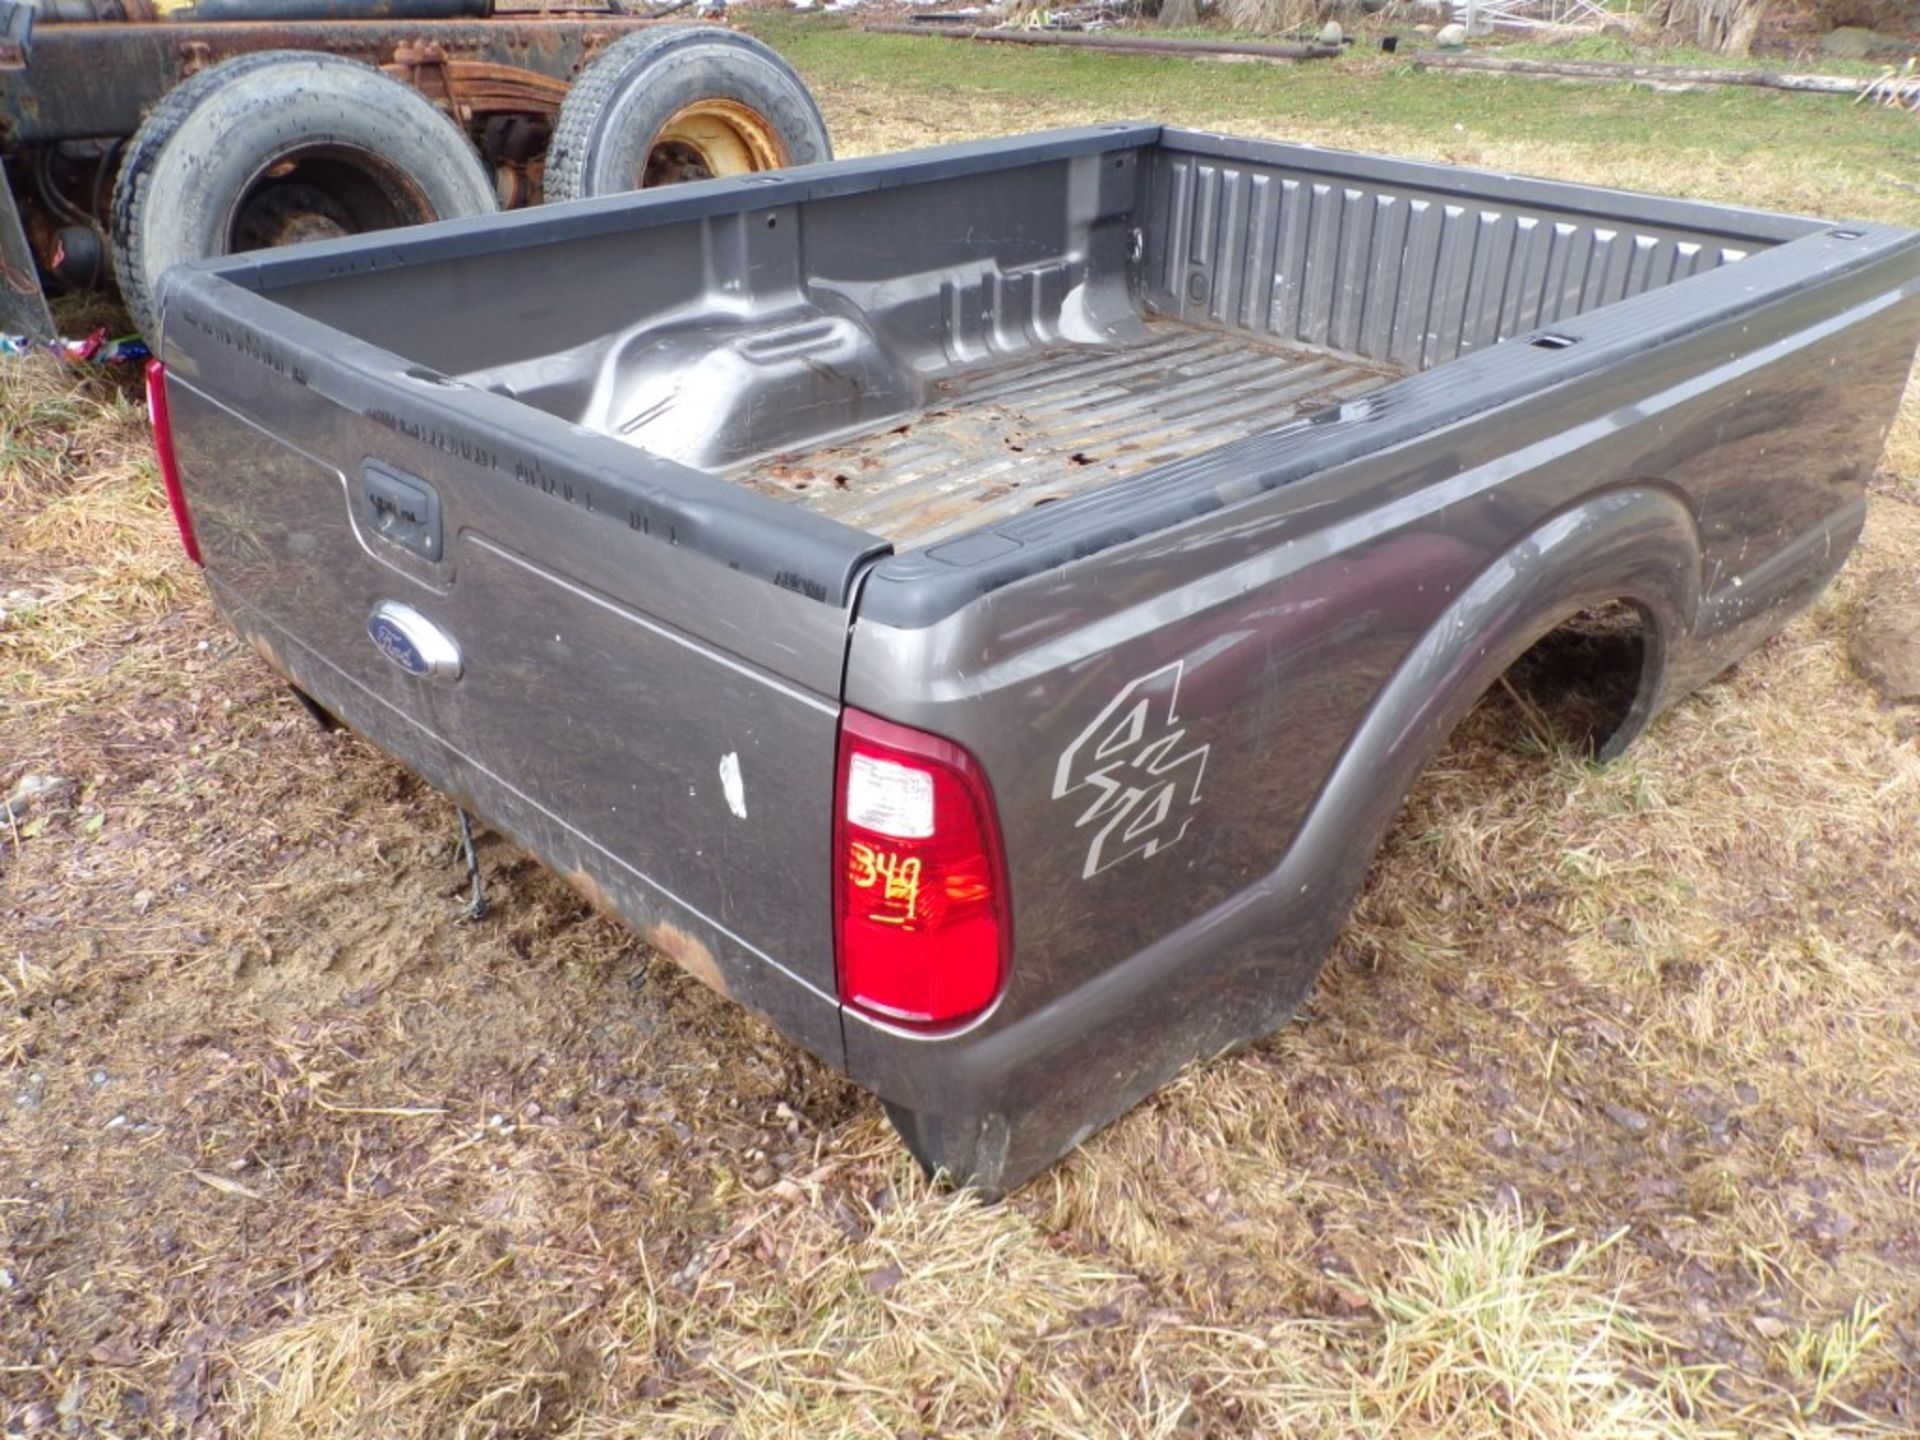 Ford Super Duty Charcoal Gray Truck Box, 8' with Rear Bumper (HAS RUST HOLES ON BOX FLOOR)